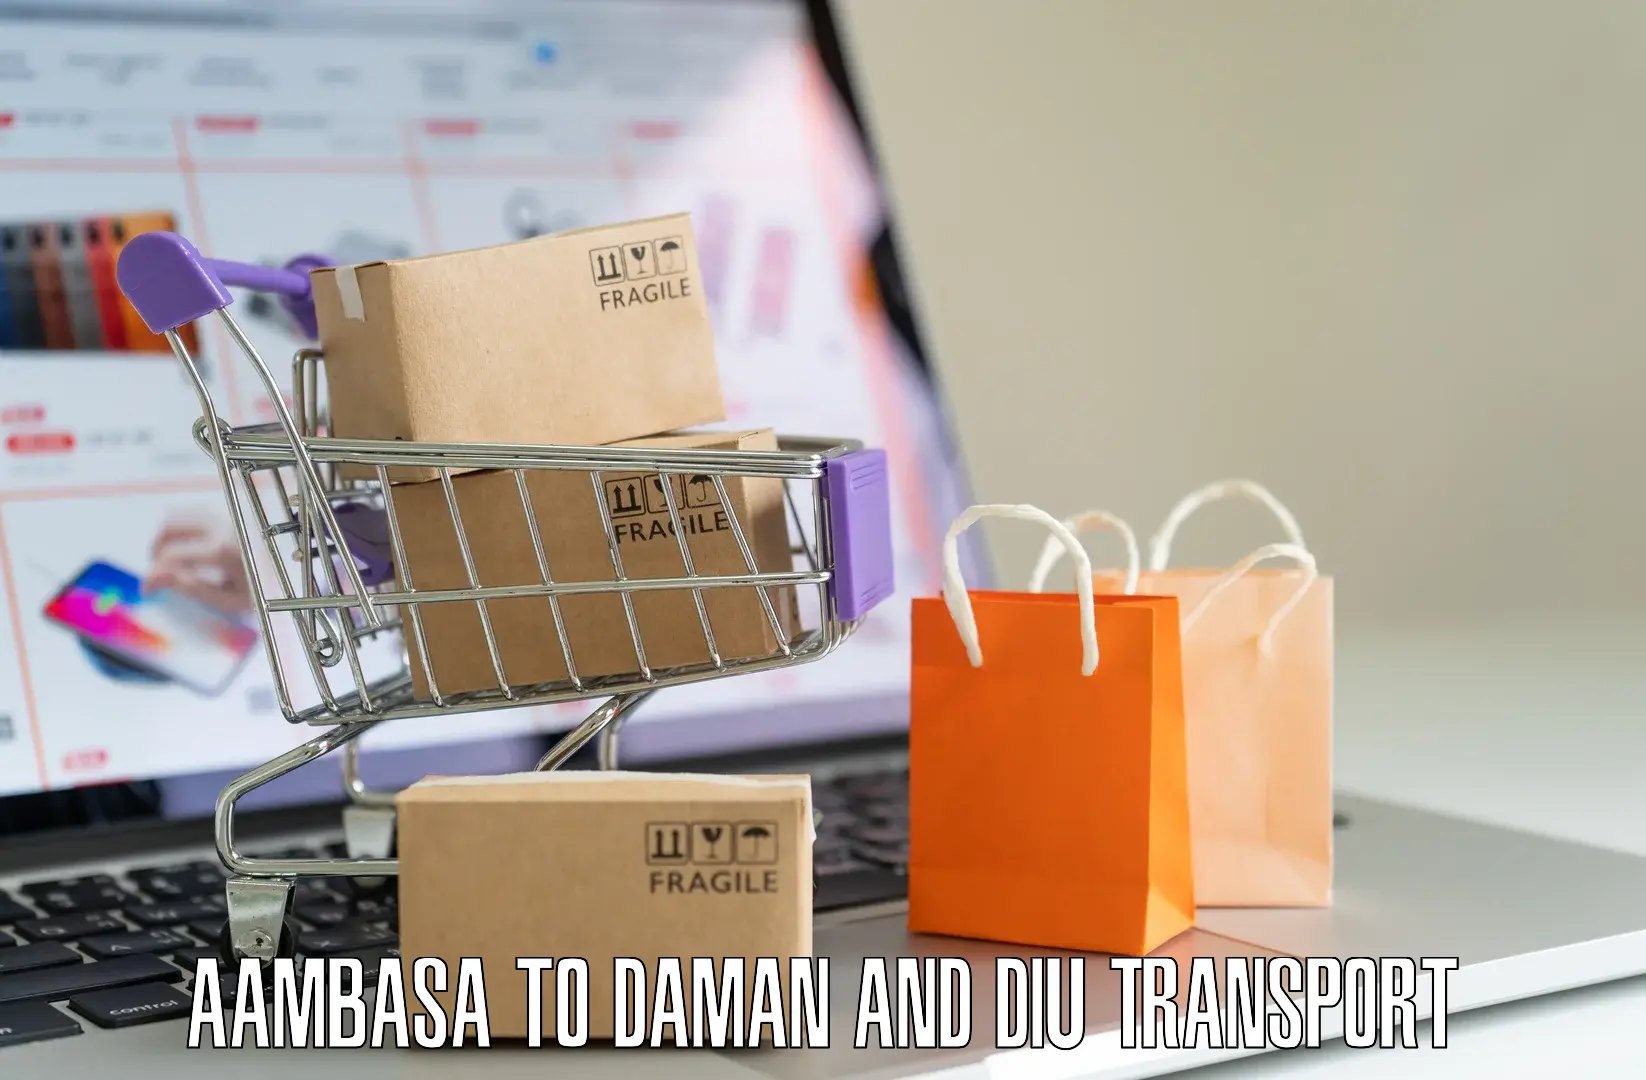 Delivery service Aambasa to Daman and Diu